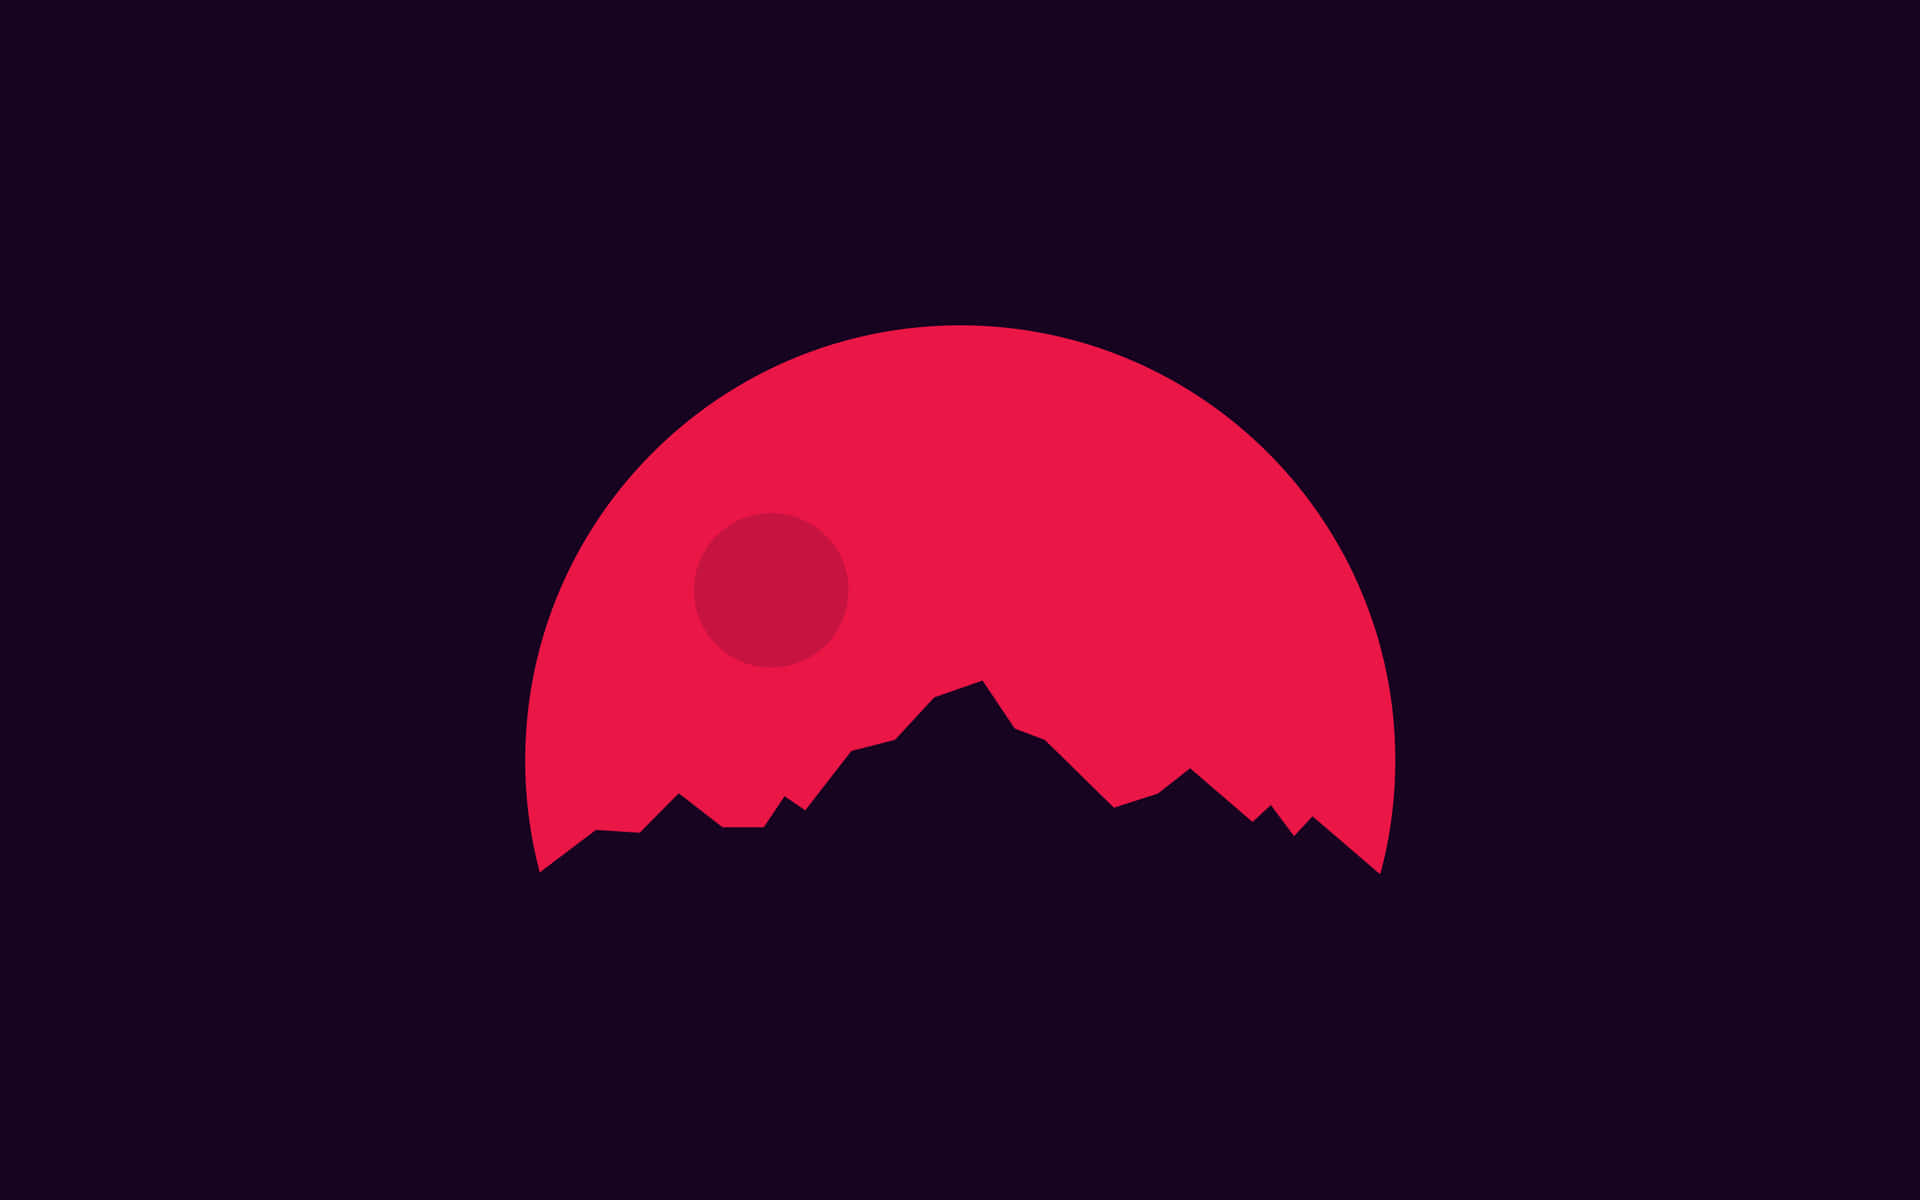 Ominous Red Moon Minimal Background Wallpaper